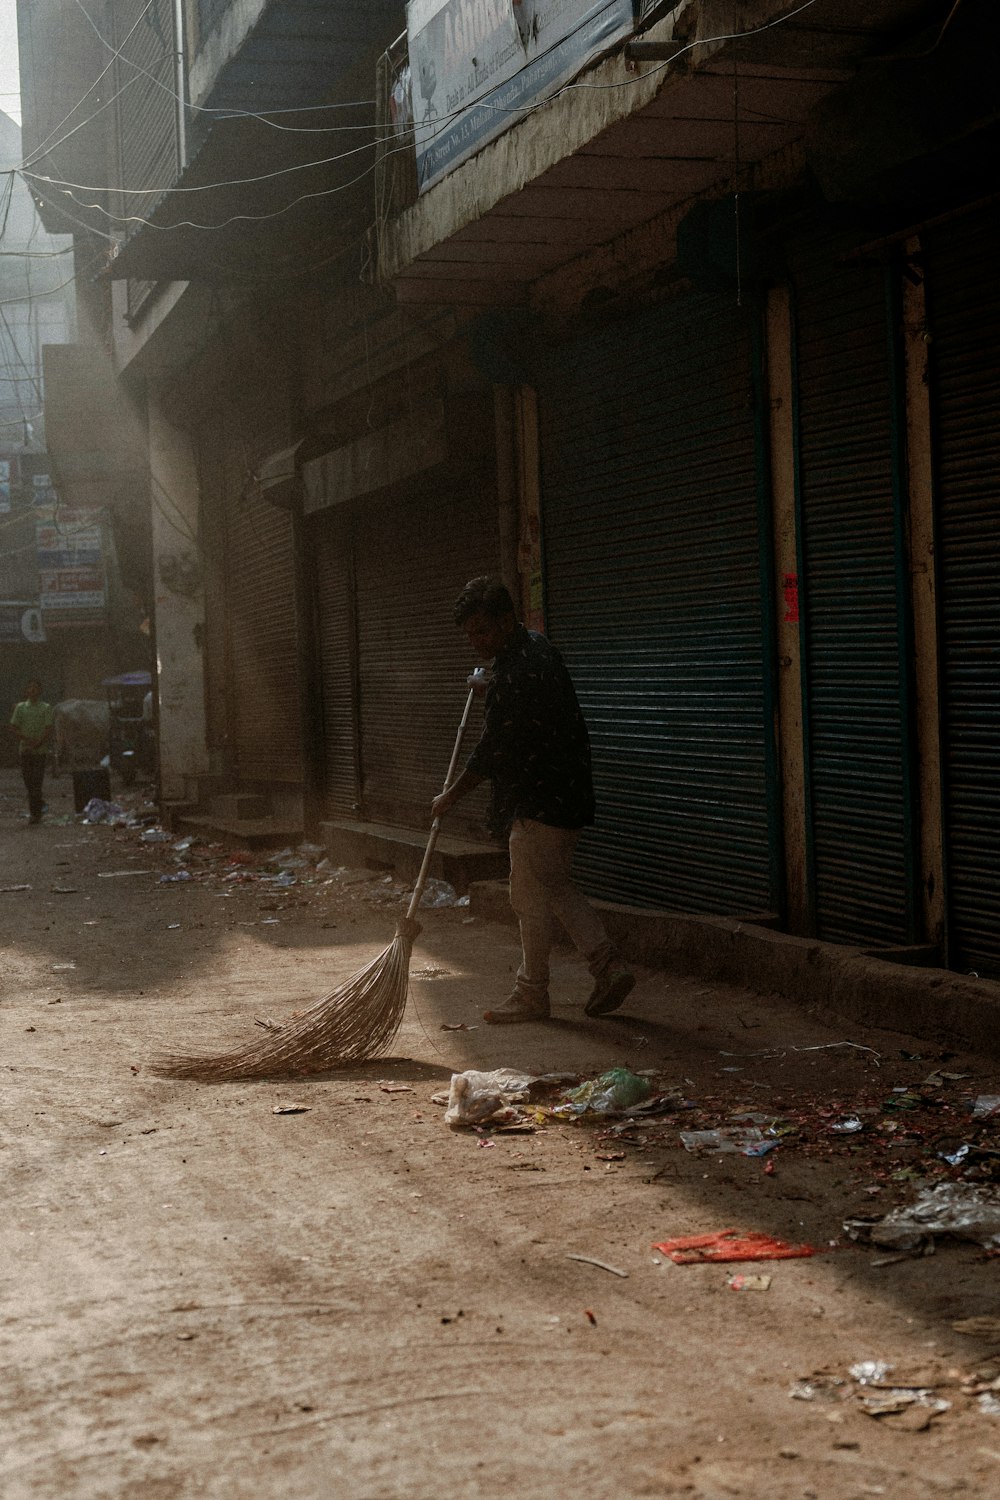 a man sweeping up trash on a street